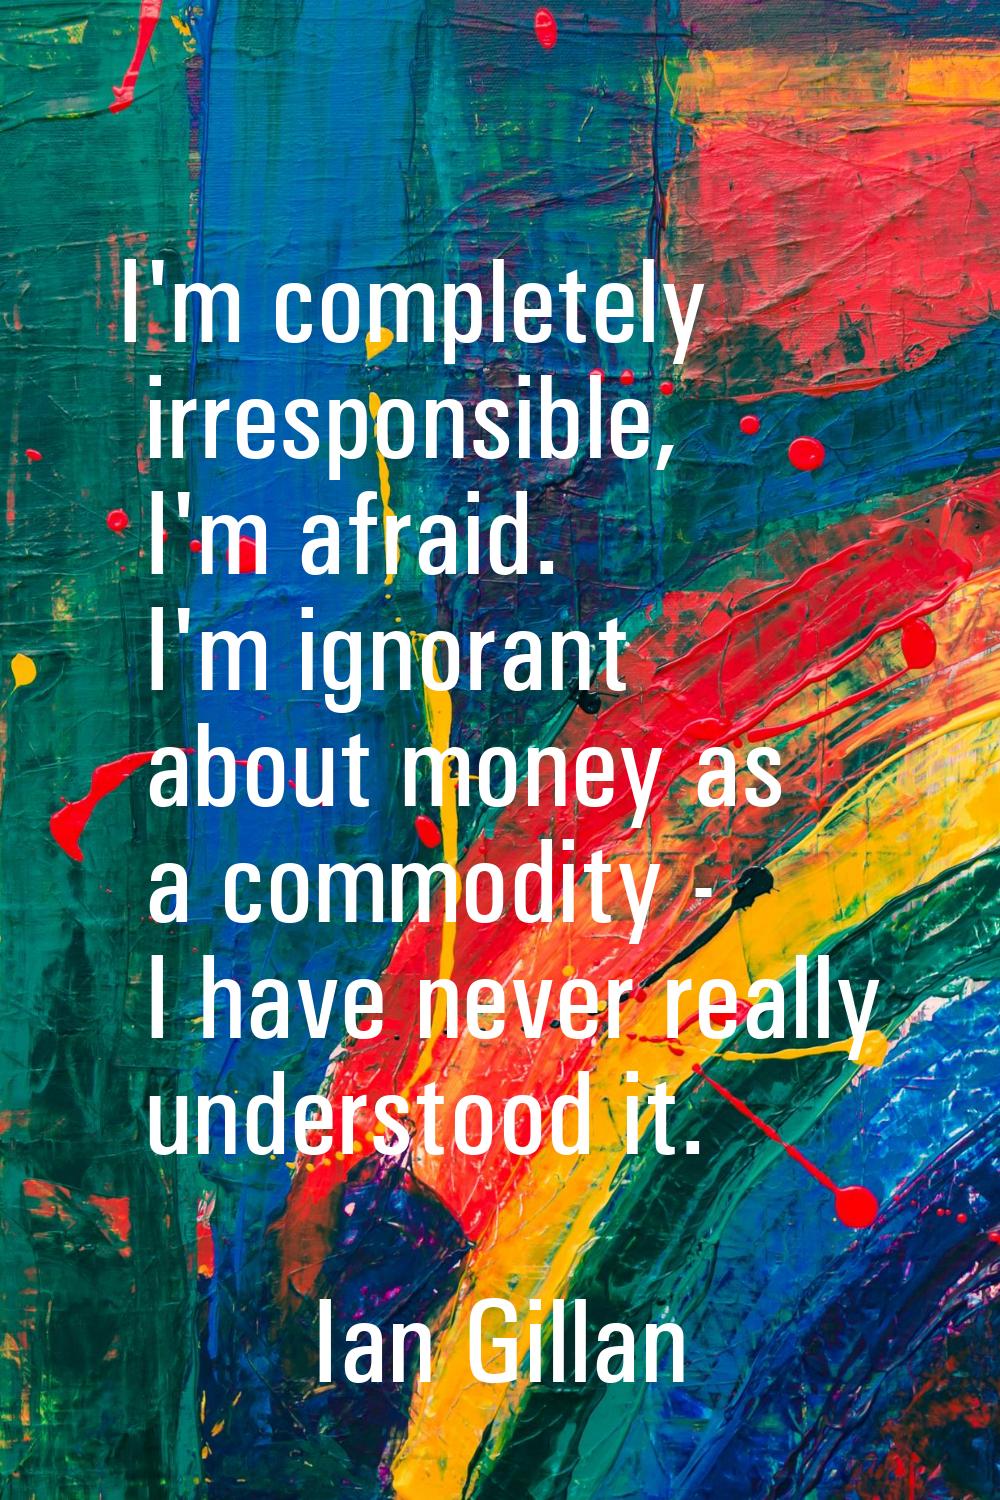 I'm completely irresponsible, I'm afraid. I'm ignorant about money as a commodity - I have never re